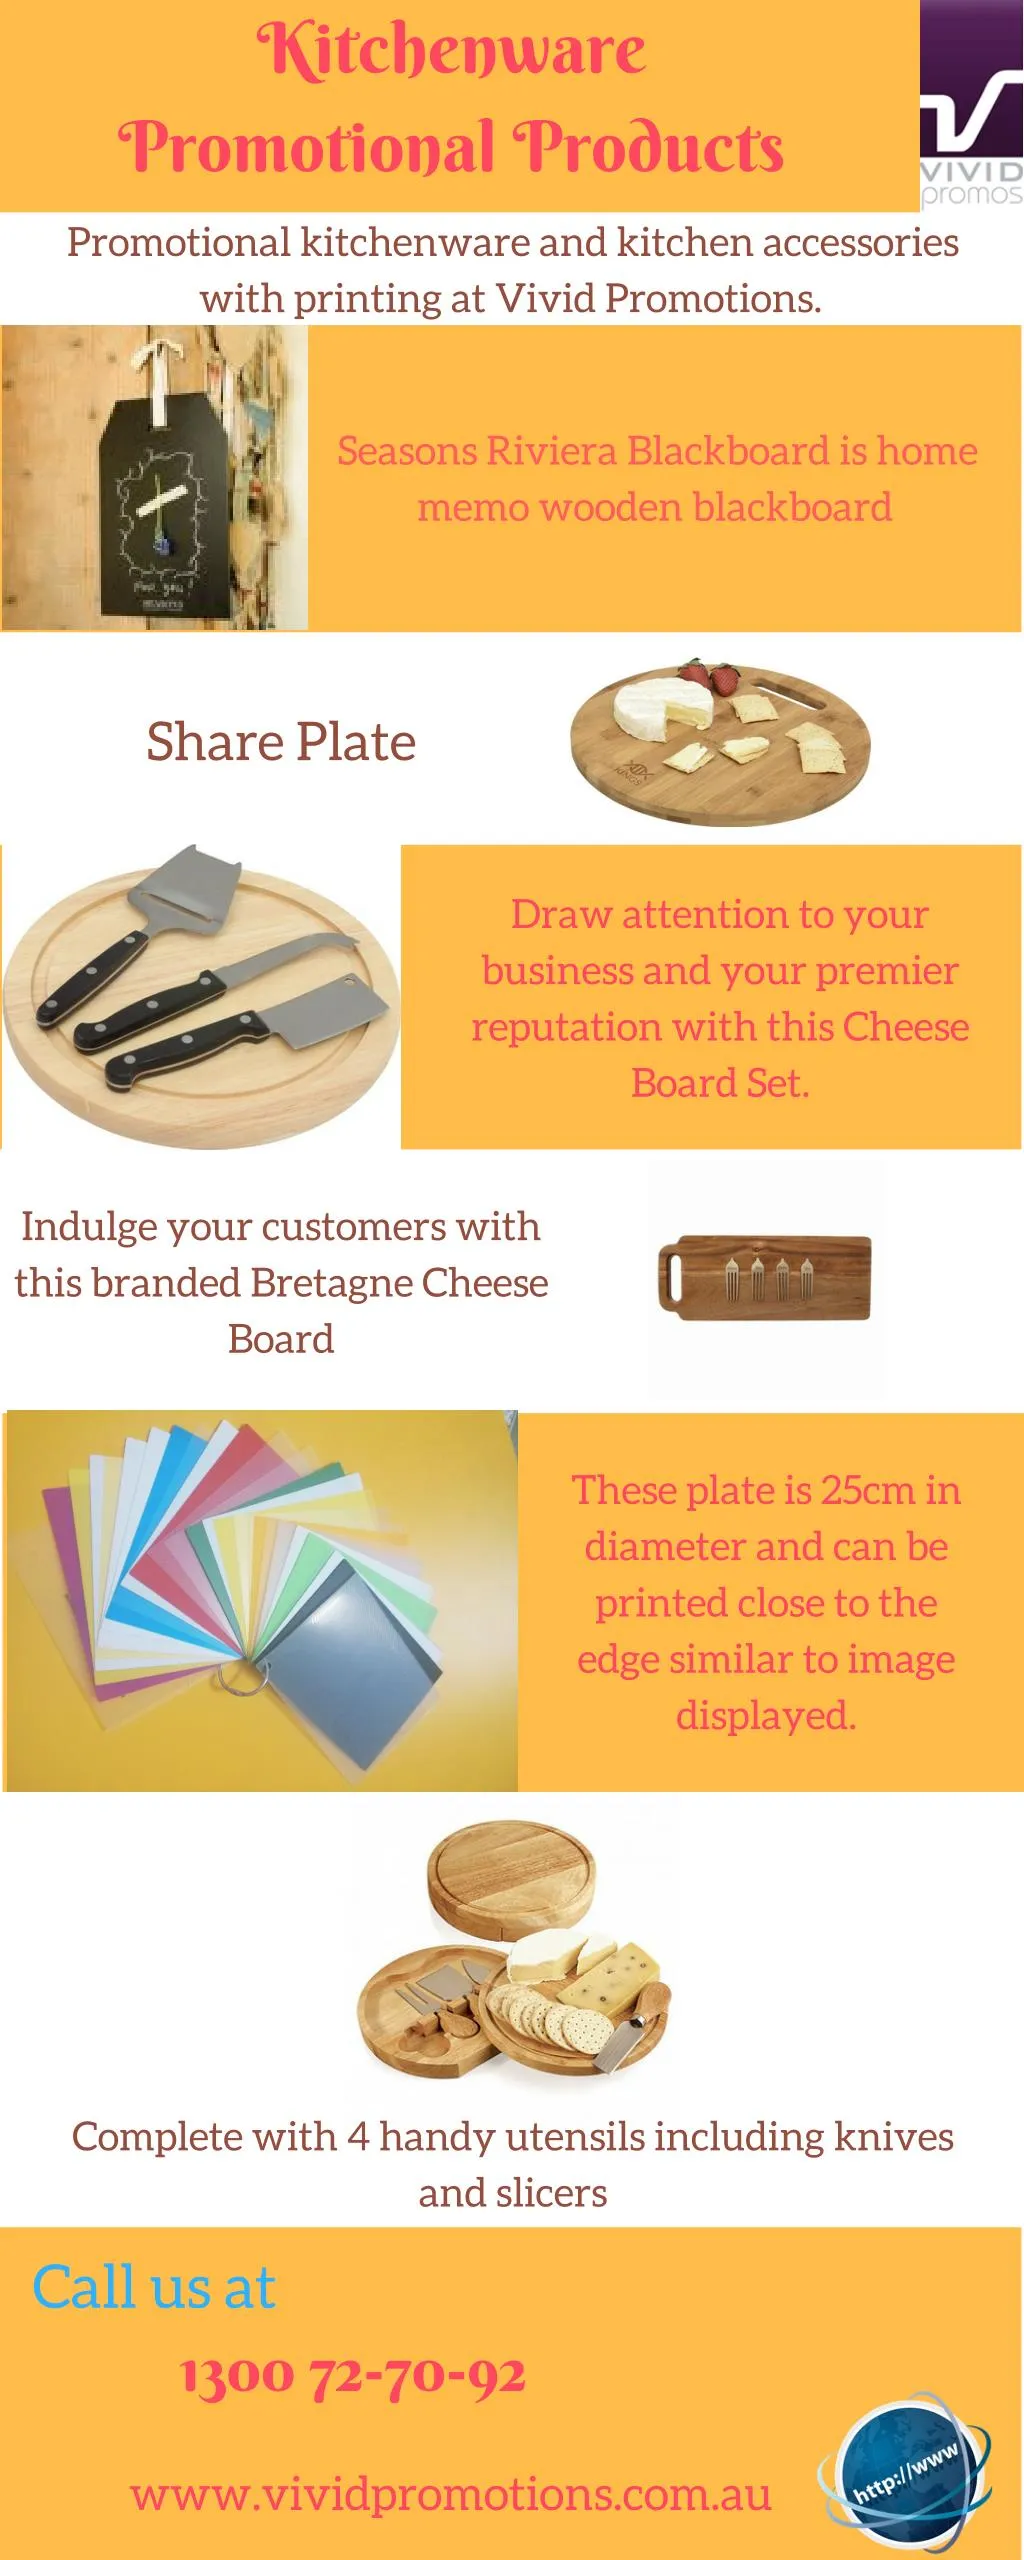 kitchenware promotional products